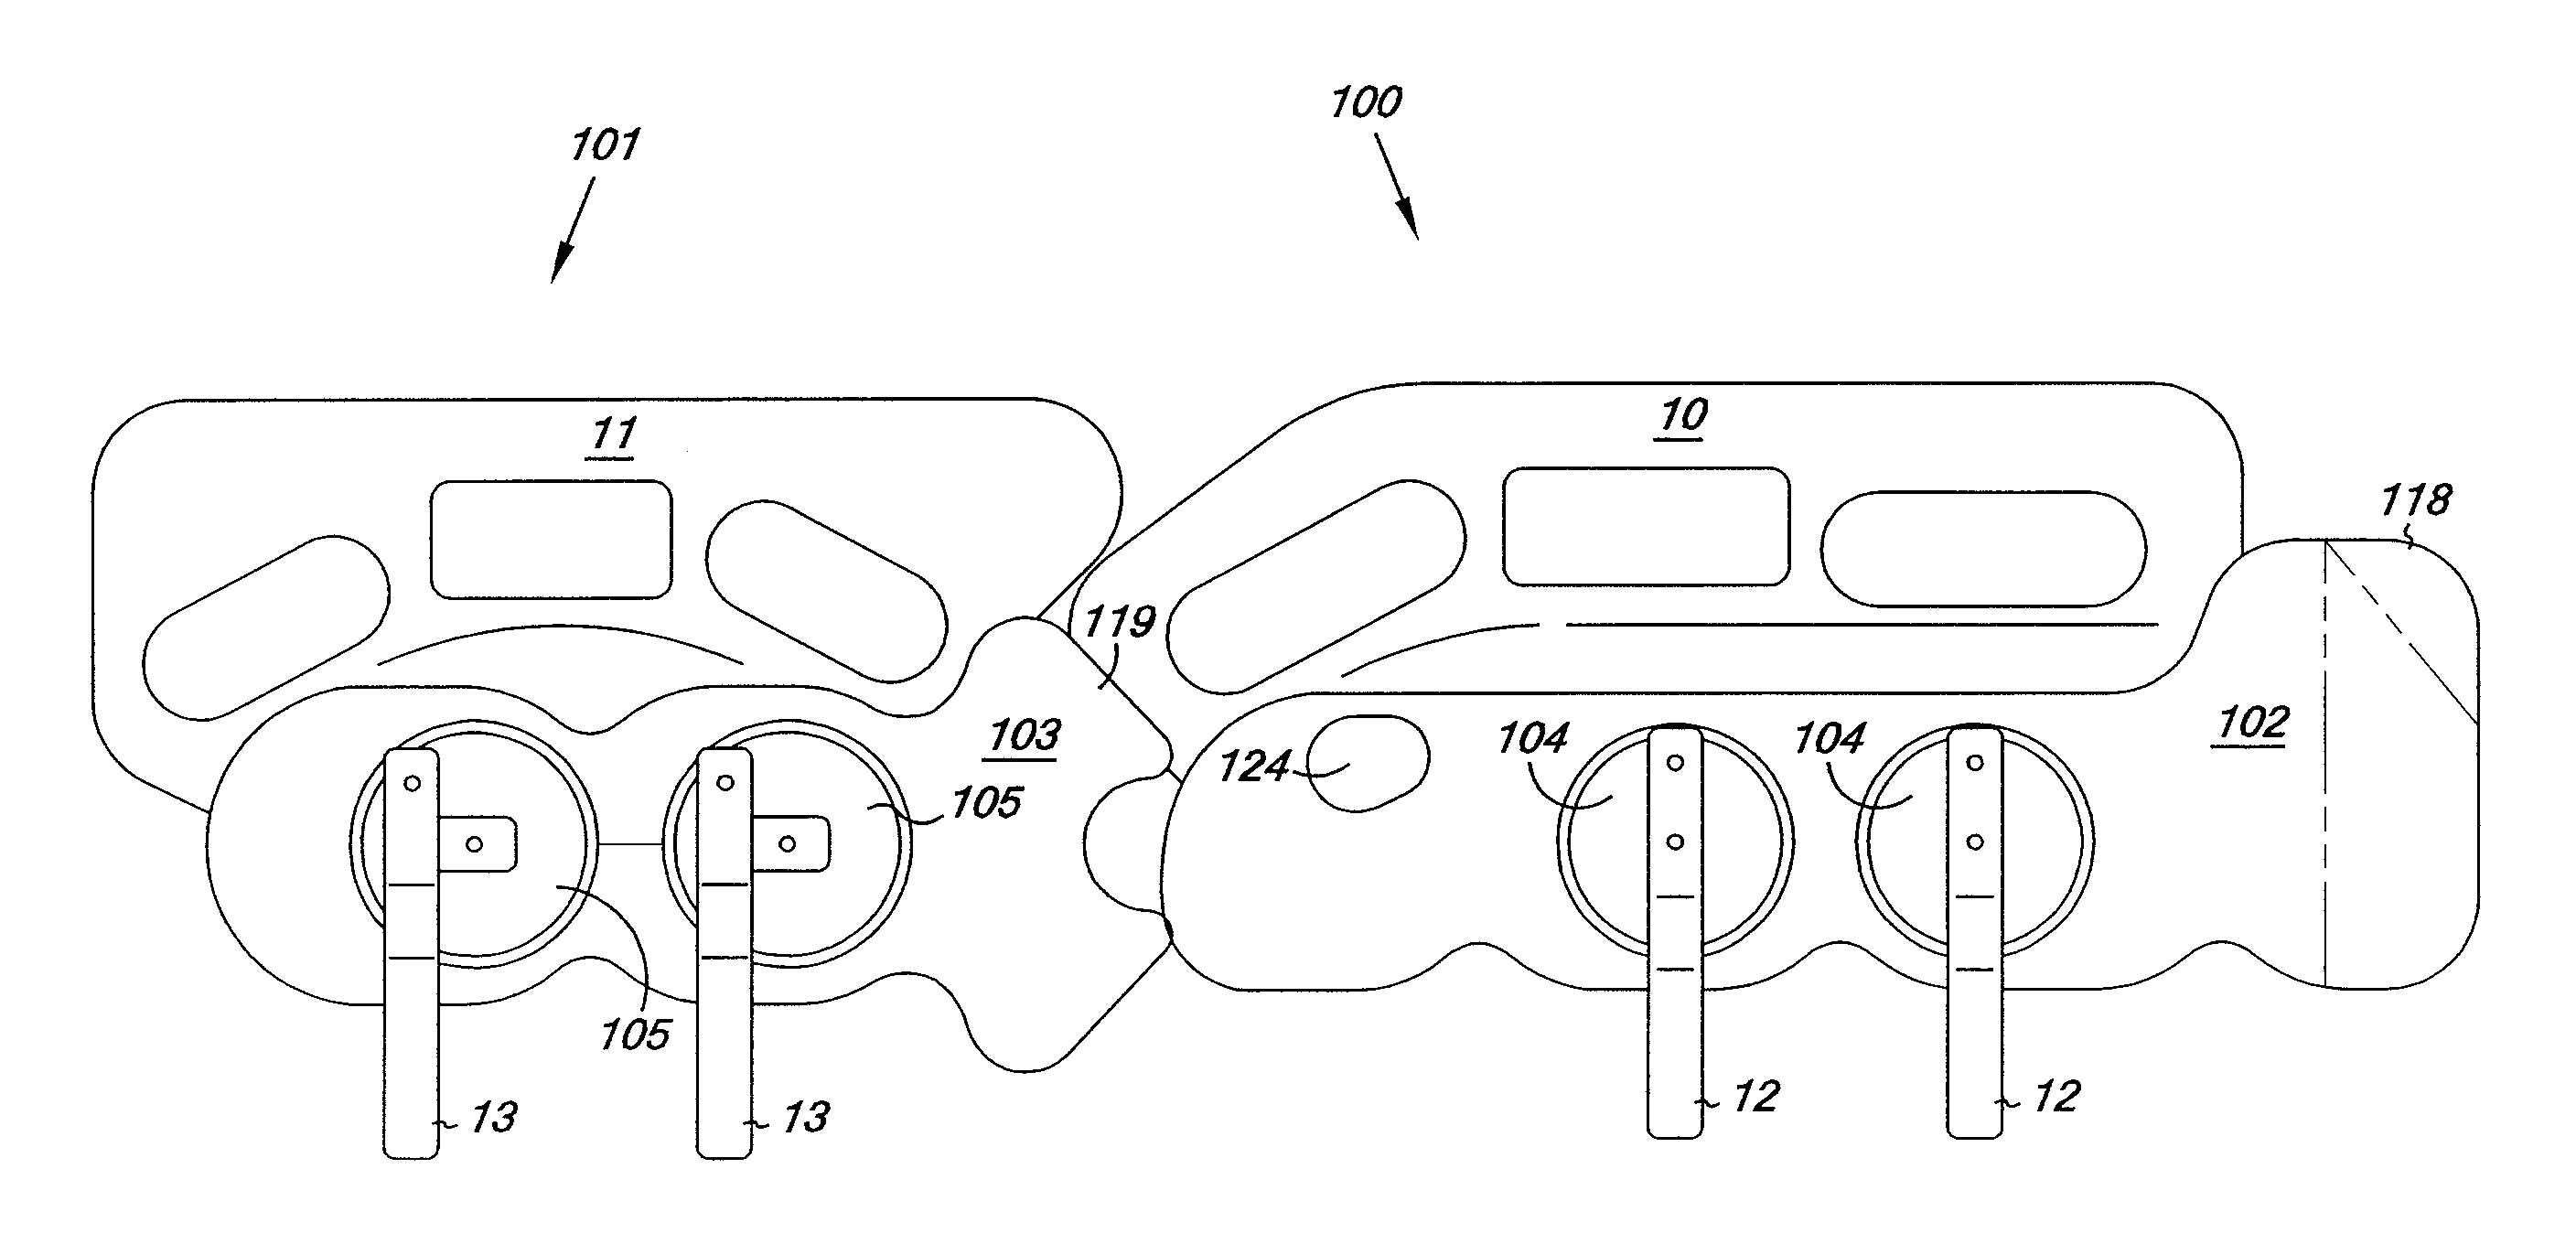 Side rail pad/panel system for patient support apparatus